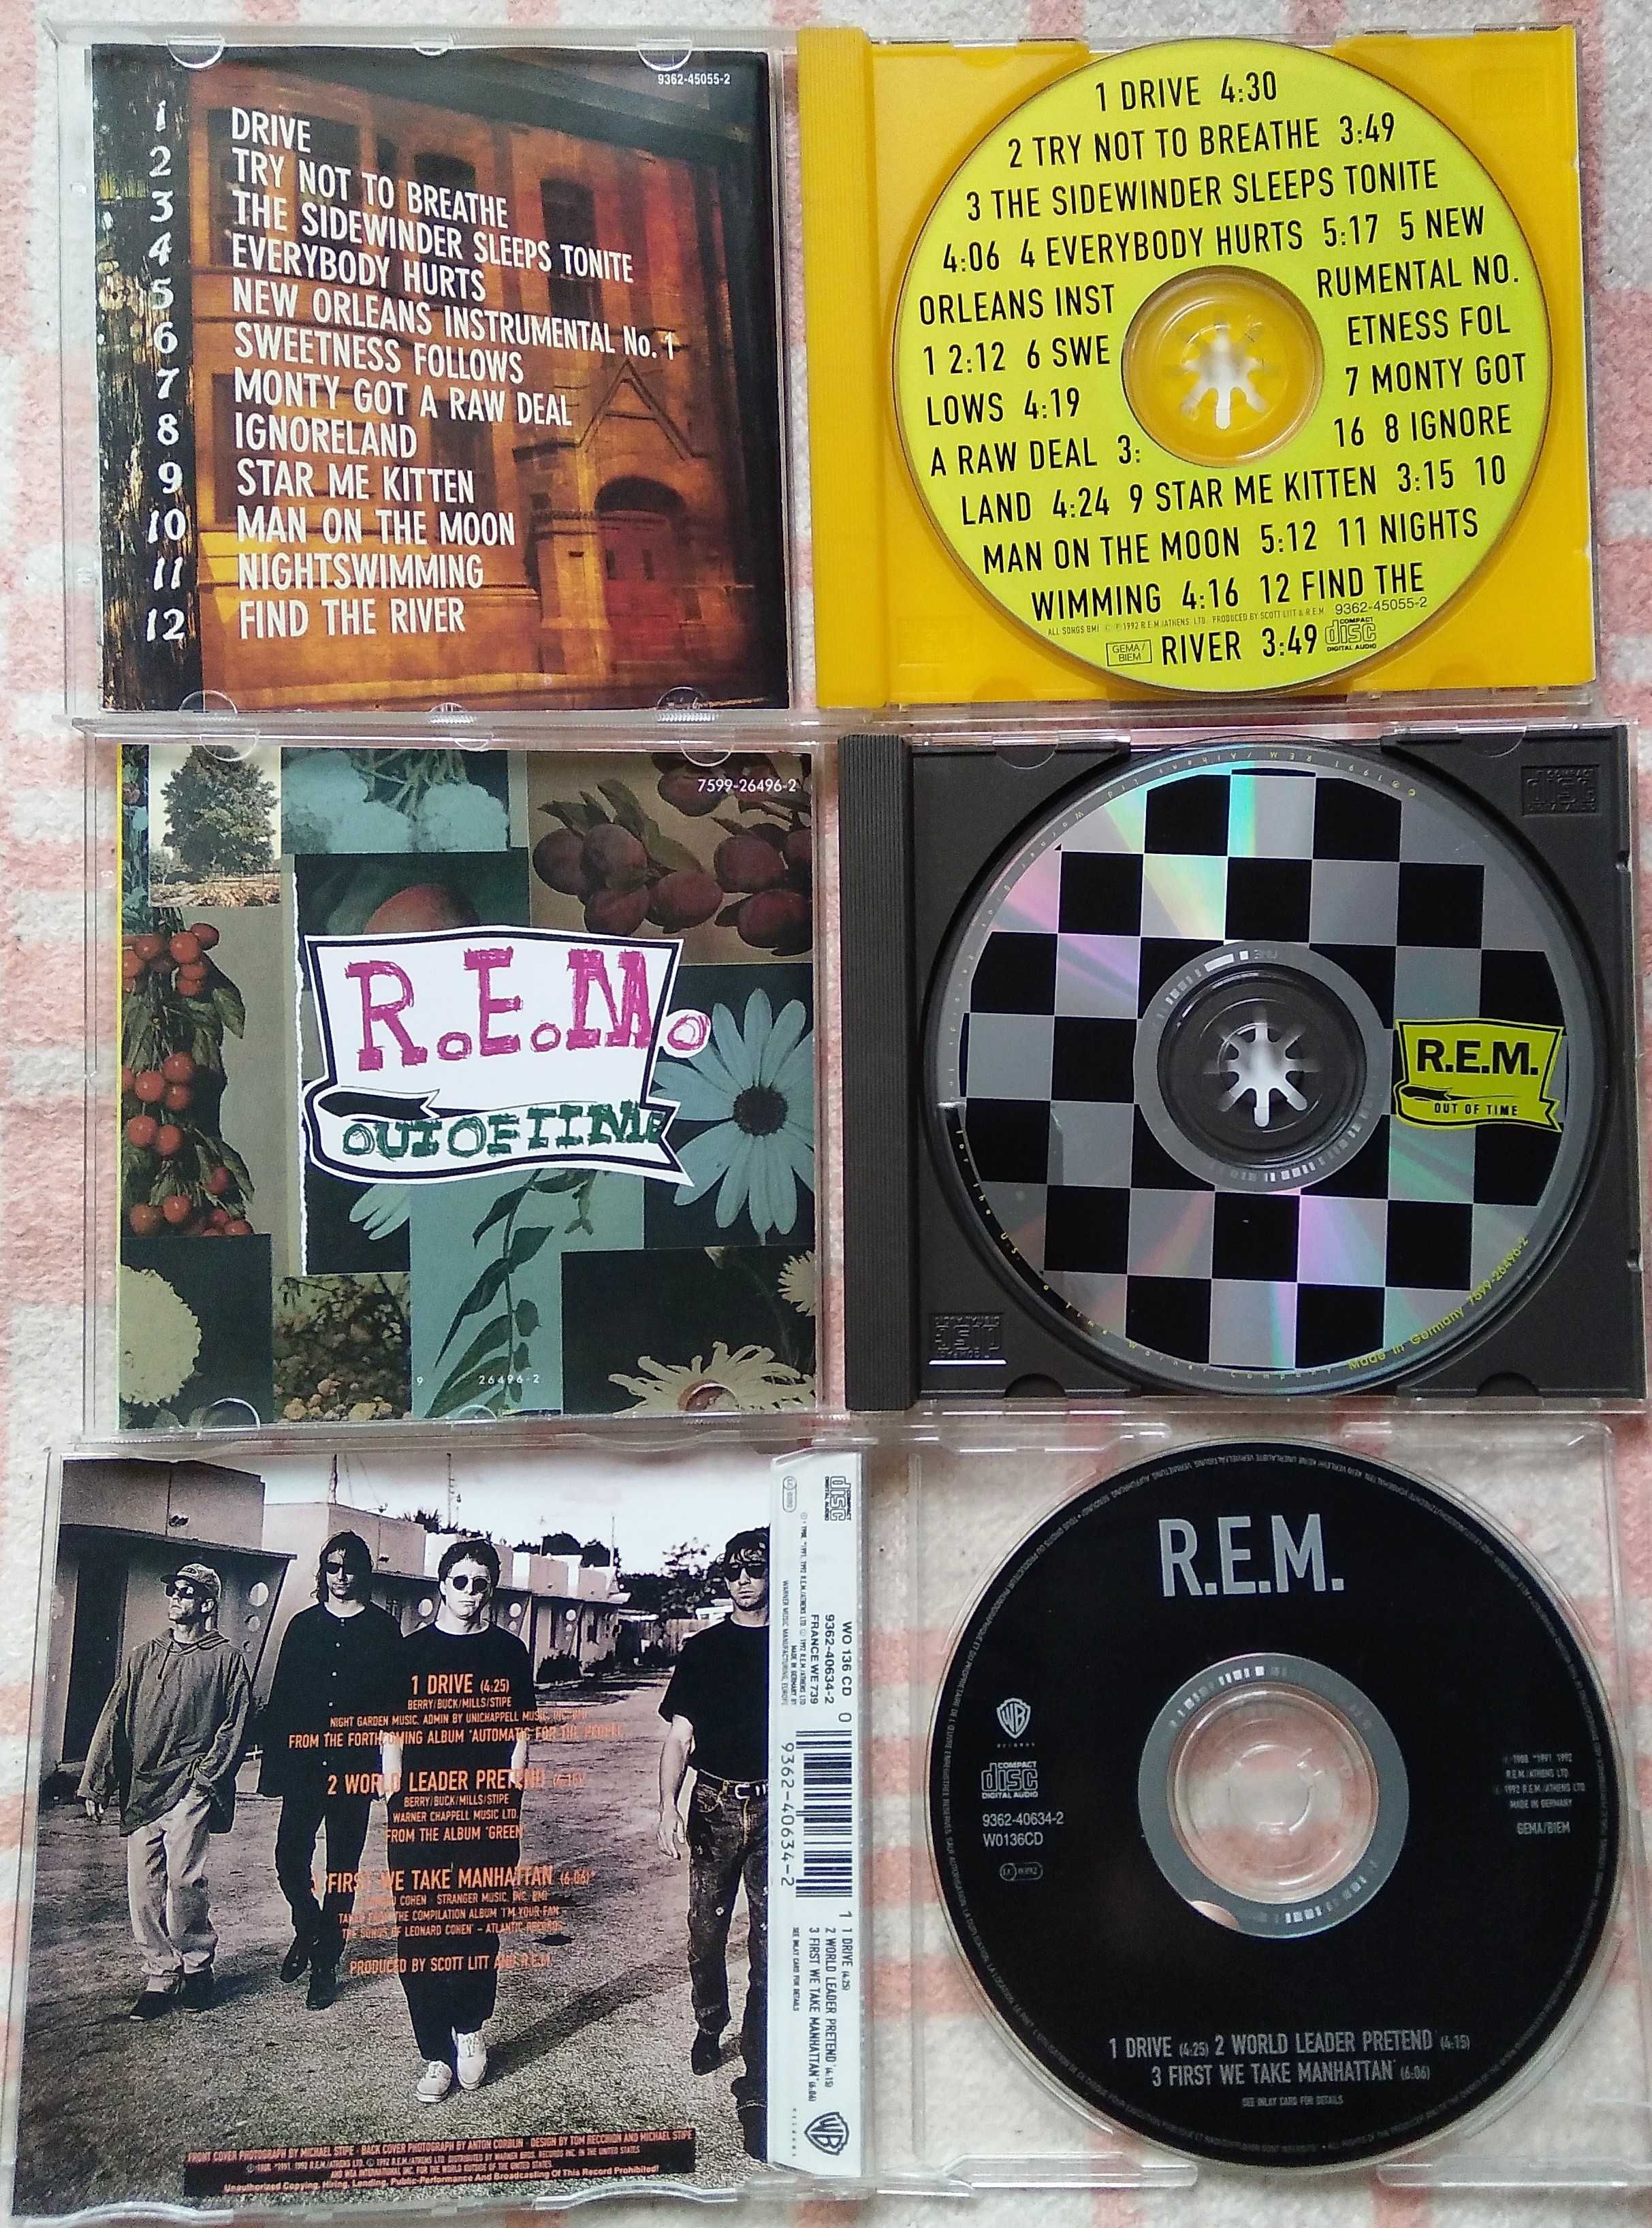 R.E.M. - Out Of Time / Automatic For The People фирмА 2 CD+ Single VG+